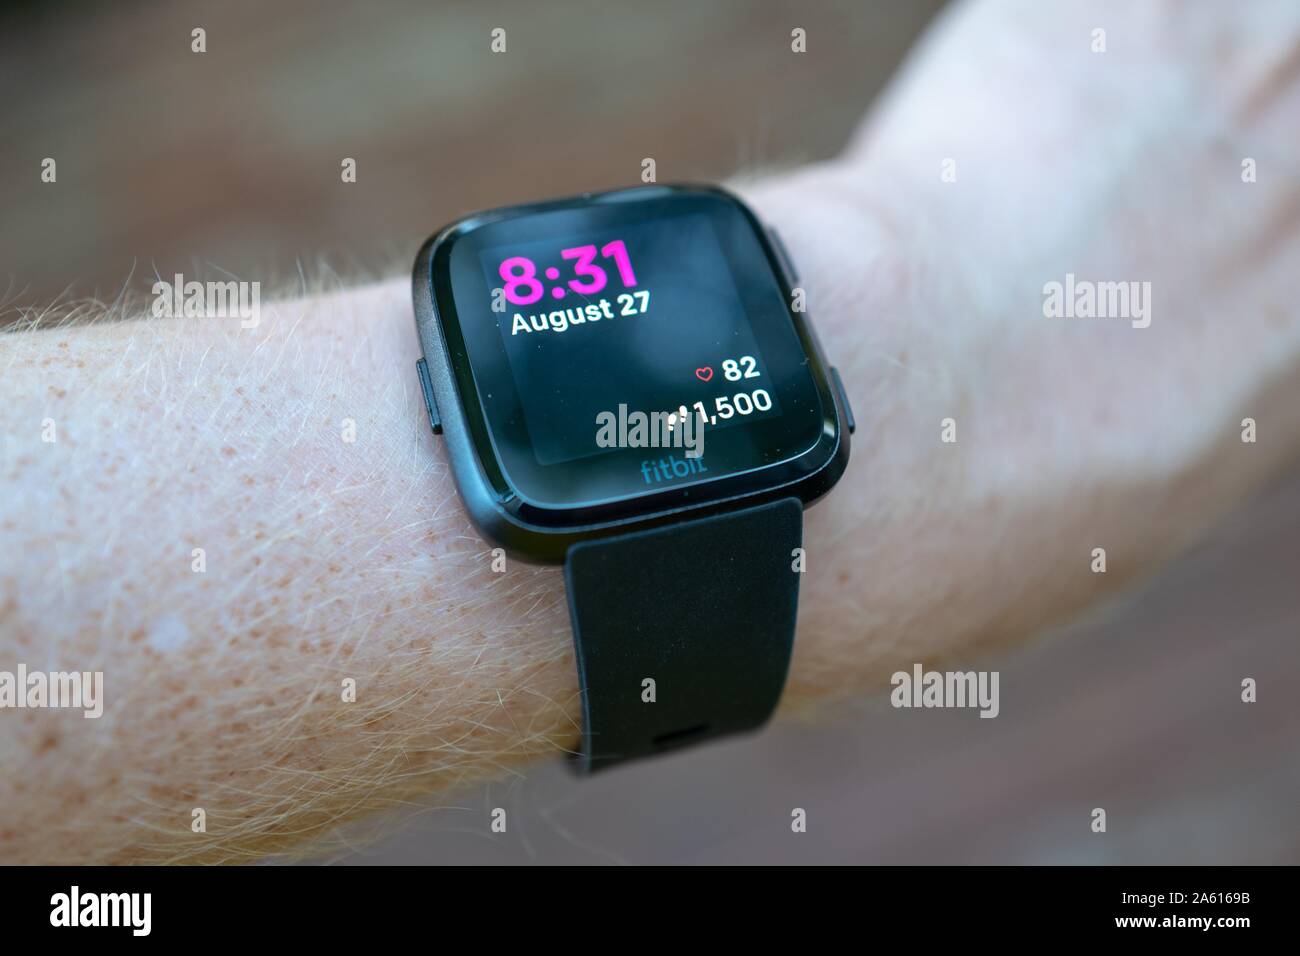 Close-up of wrist of a man wearing the Fitbit Versa smart watch, San Ramon,  California, showing heart rate and step count, August 27, 2019 Stock Photo  - Alamy